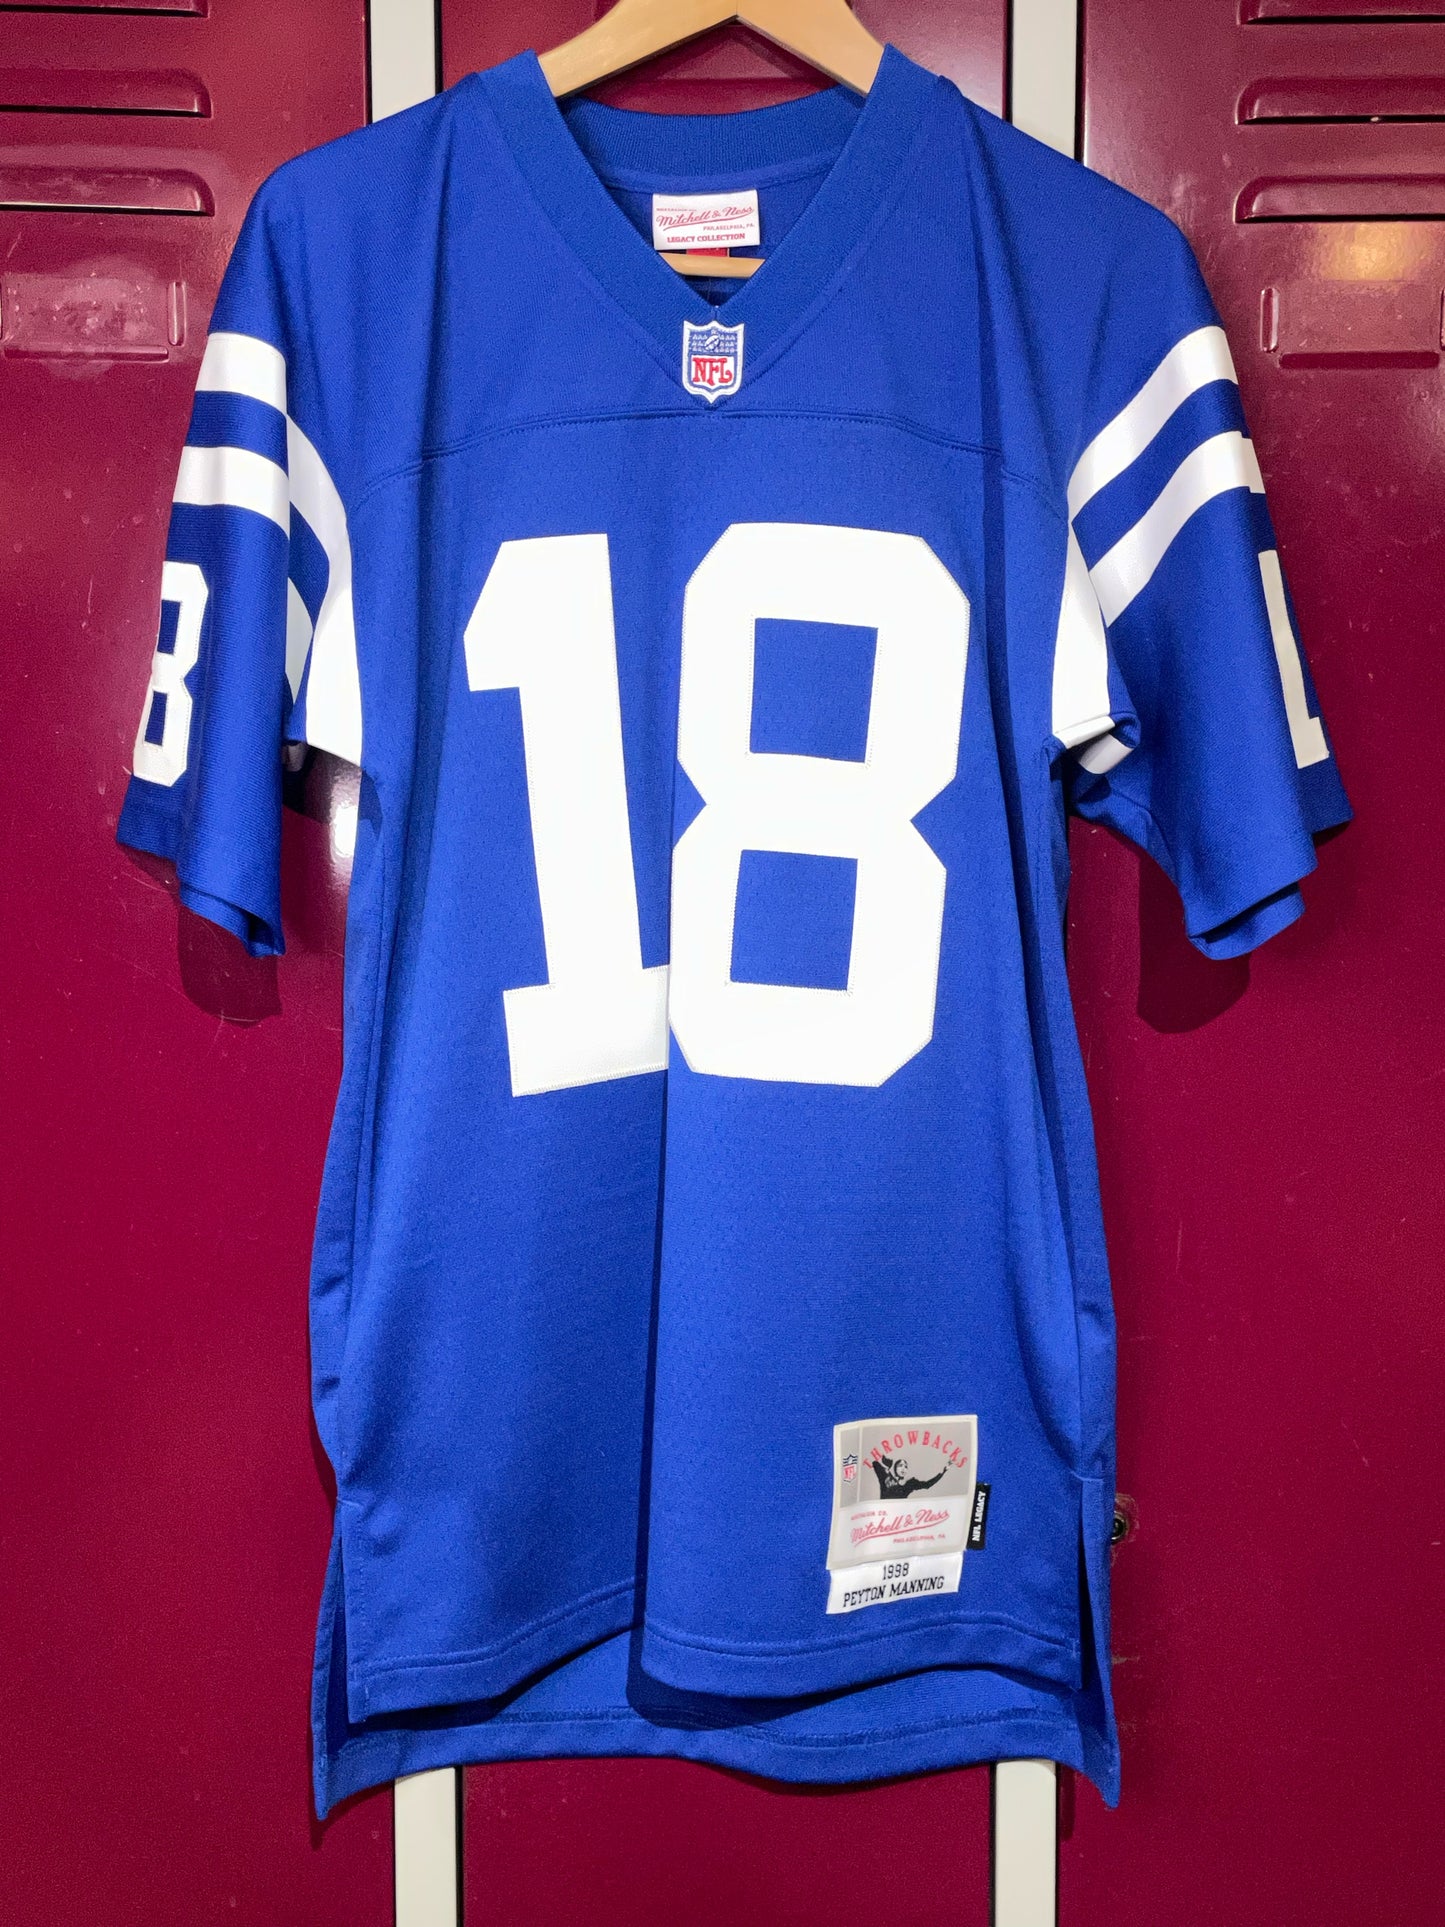 MITCHEL & NESS INDIANAPOLIS COLTS "PEYTON MANNING" NFL FOOTBALL JERSEY  SZ: 36/S